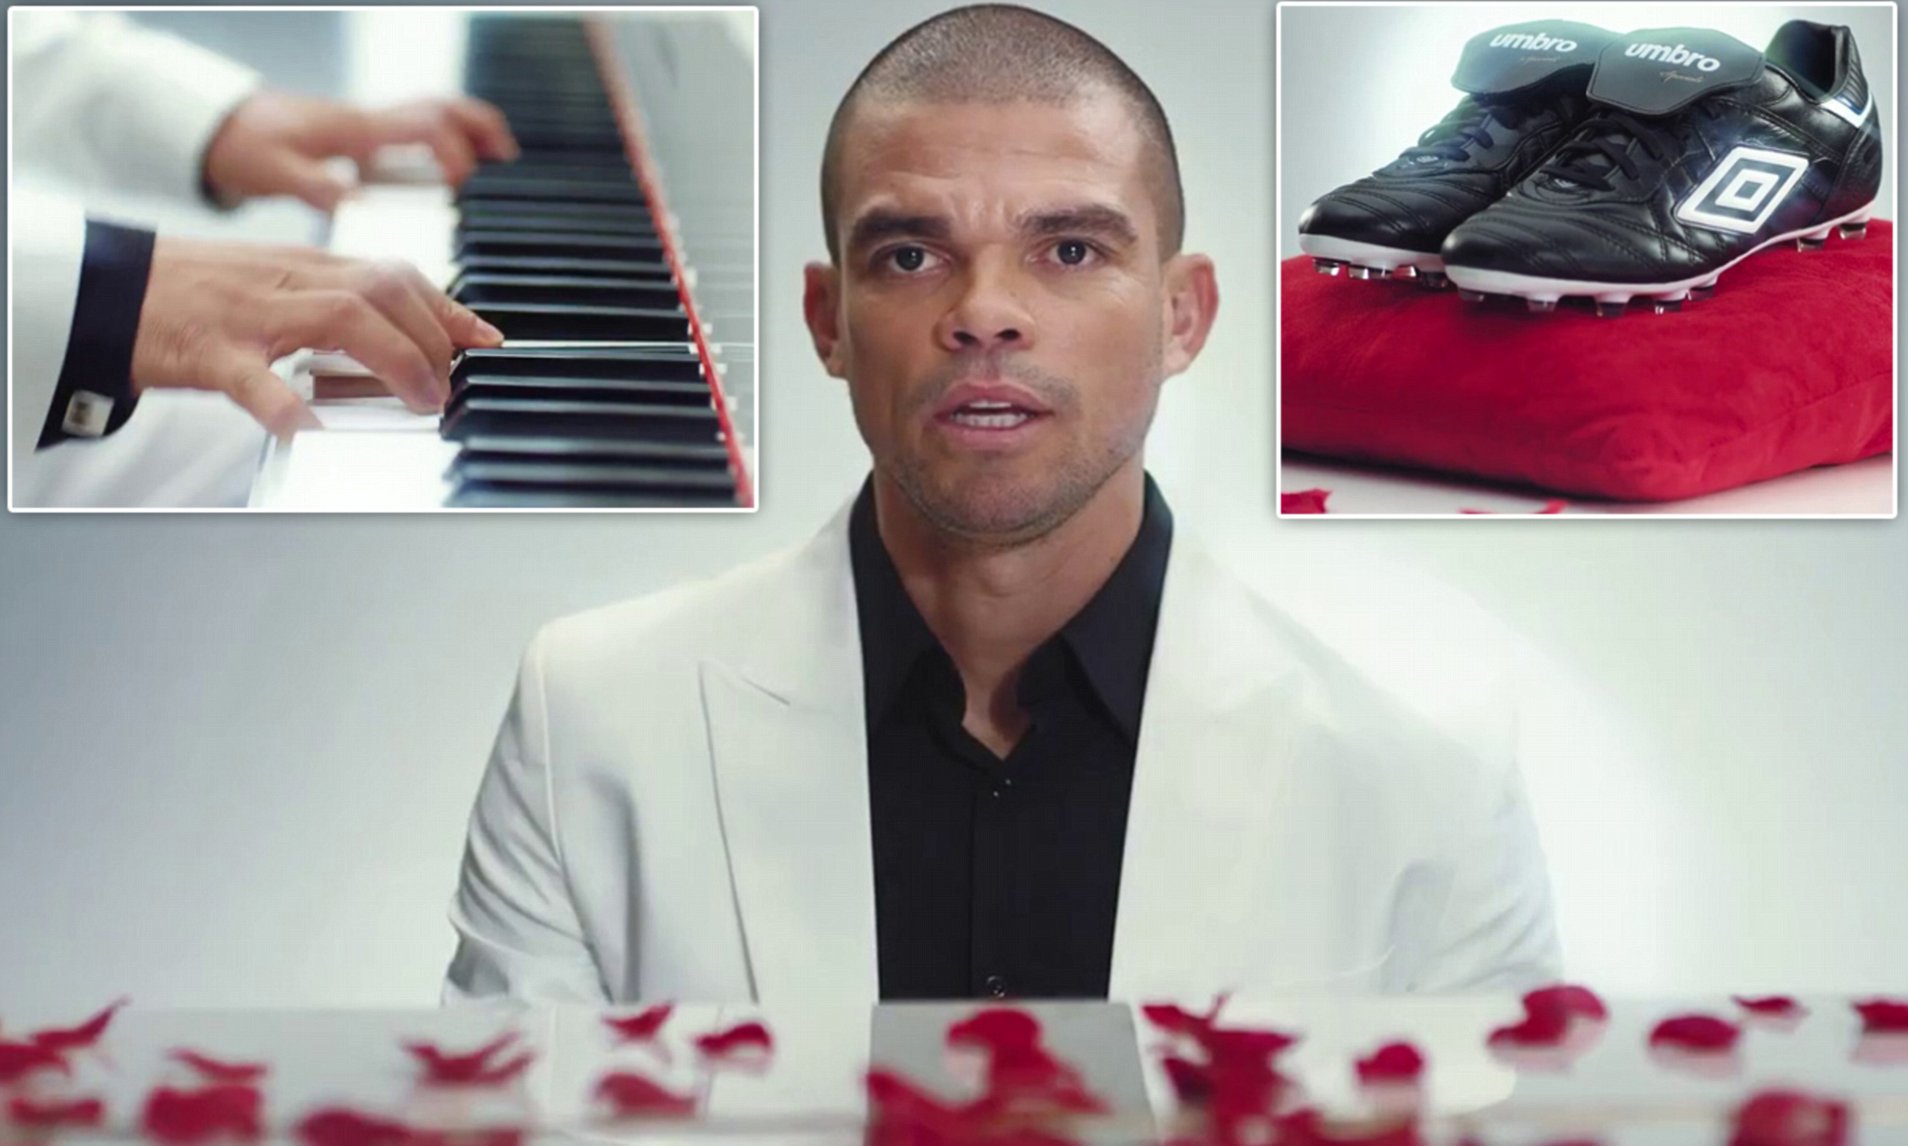 Real Madrid & Portugal’s Pepe Serenades His Umbro Boots For Valentine's Day